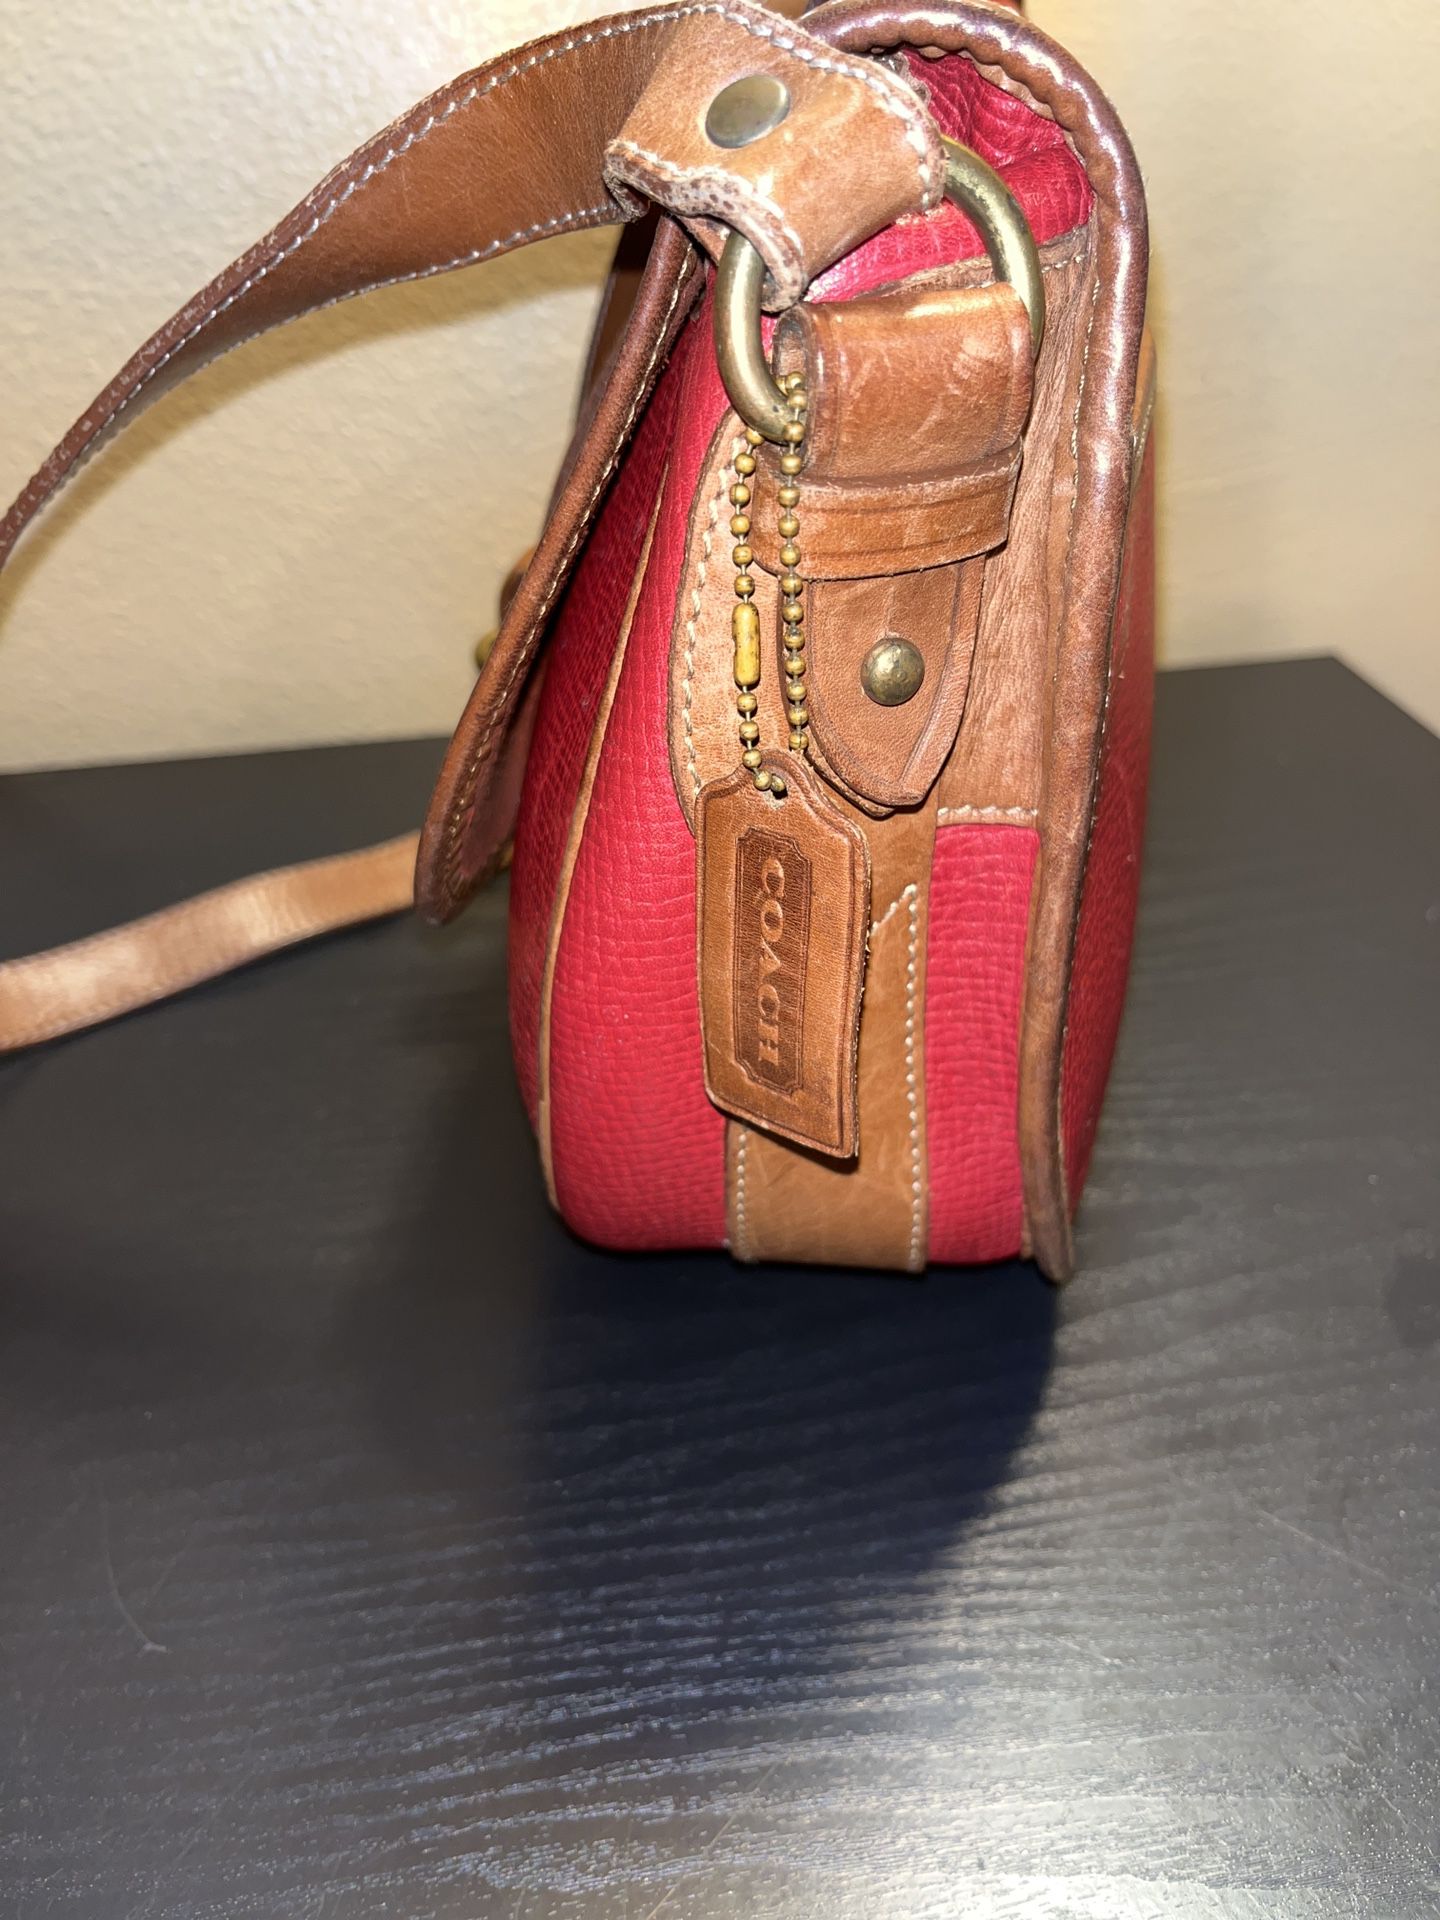 Vintage Coach Green Leather Patricia’s Legacy Crossbody Bag for Sale in  Miramar, FL - OfferUp